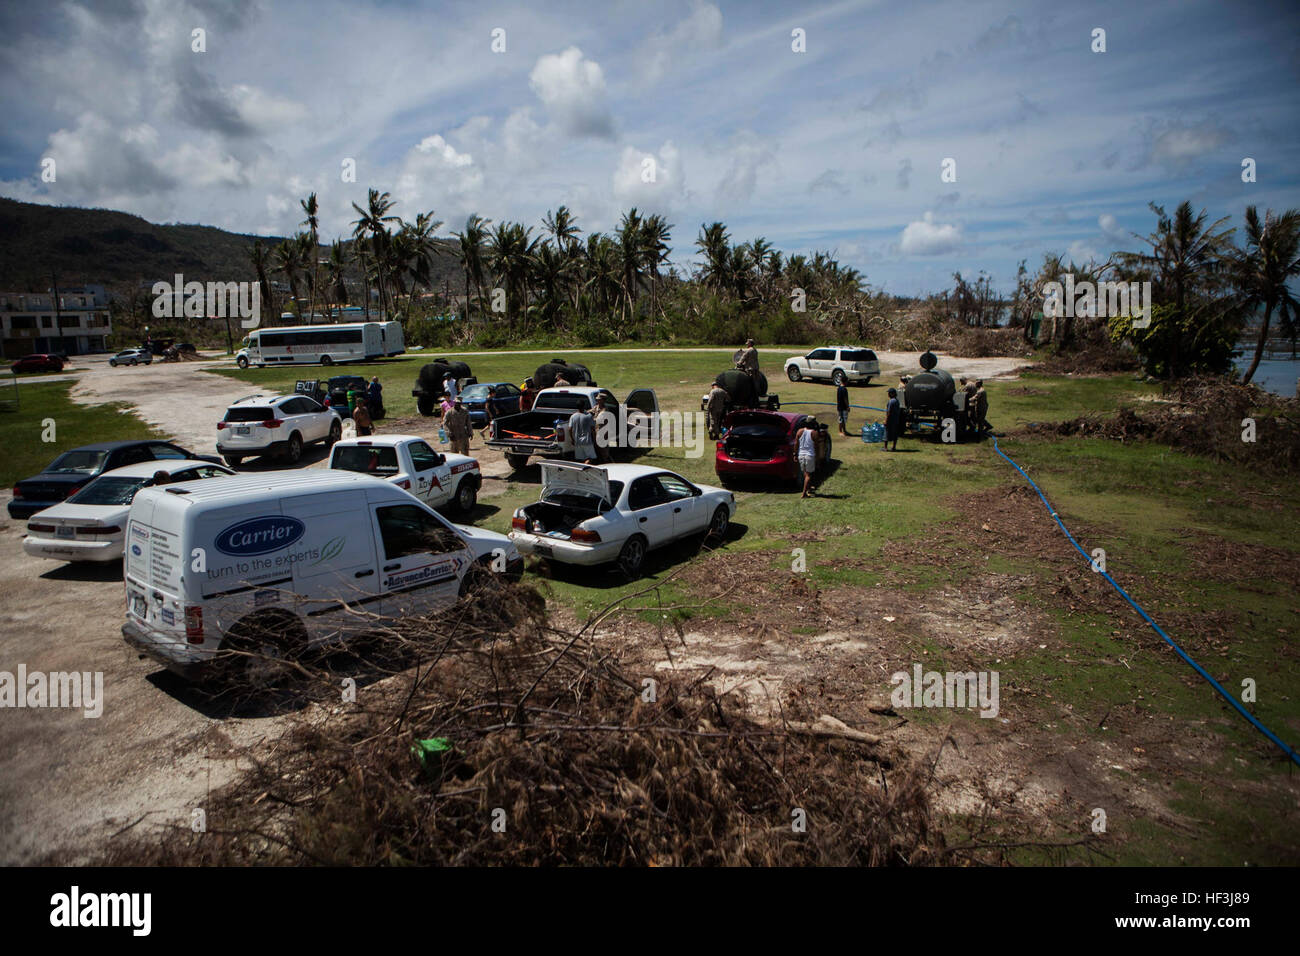 Vehicles wait in line as U.S. Marines with Combat Logistics Battalion 31, 31st Marine Expeditionary Unit, distribute water to local civilians during typhoon relief efforts in Saipan, Aug. 12, 2015. The 31st MEU and the ships of the Bonhomme Richard Amphibious Ready Group are assisting local and federal agencies with distributing emergency relief supplies to Saipan after the island was struck by Typhoon Soudelor Aug. 2-3. (U.S. Marine Corps photo by Gunnery Sgt. Ismael Pena/Released) Marines bring clean water to people of Saipan 150812-M-MX588-163 Stock Photo